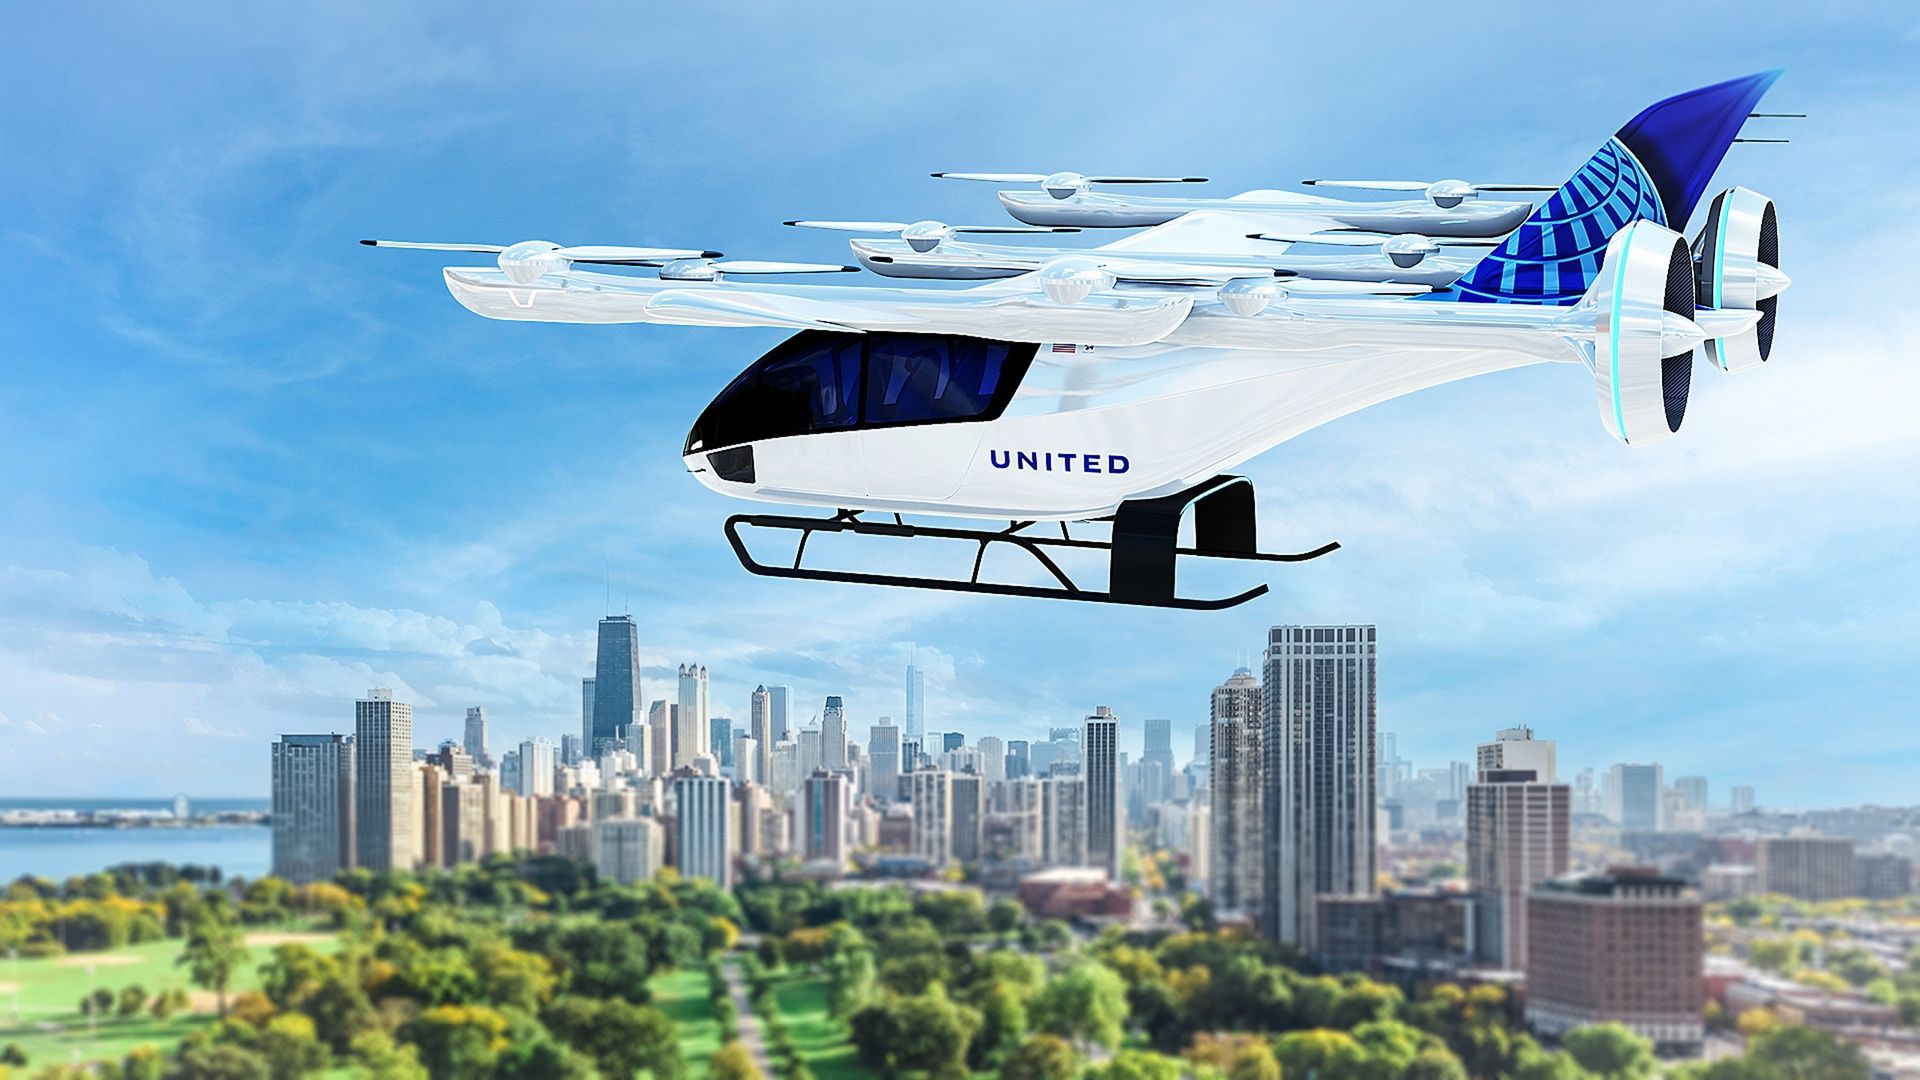 An artist's rendition of a United Airlines flying taxi over a city.